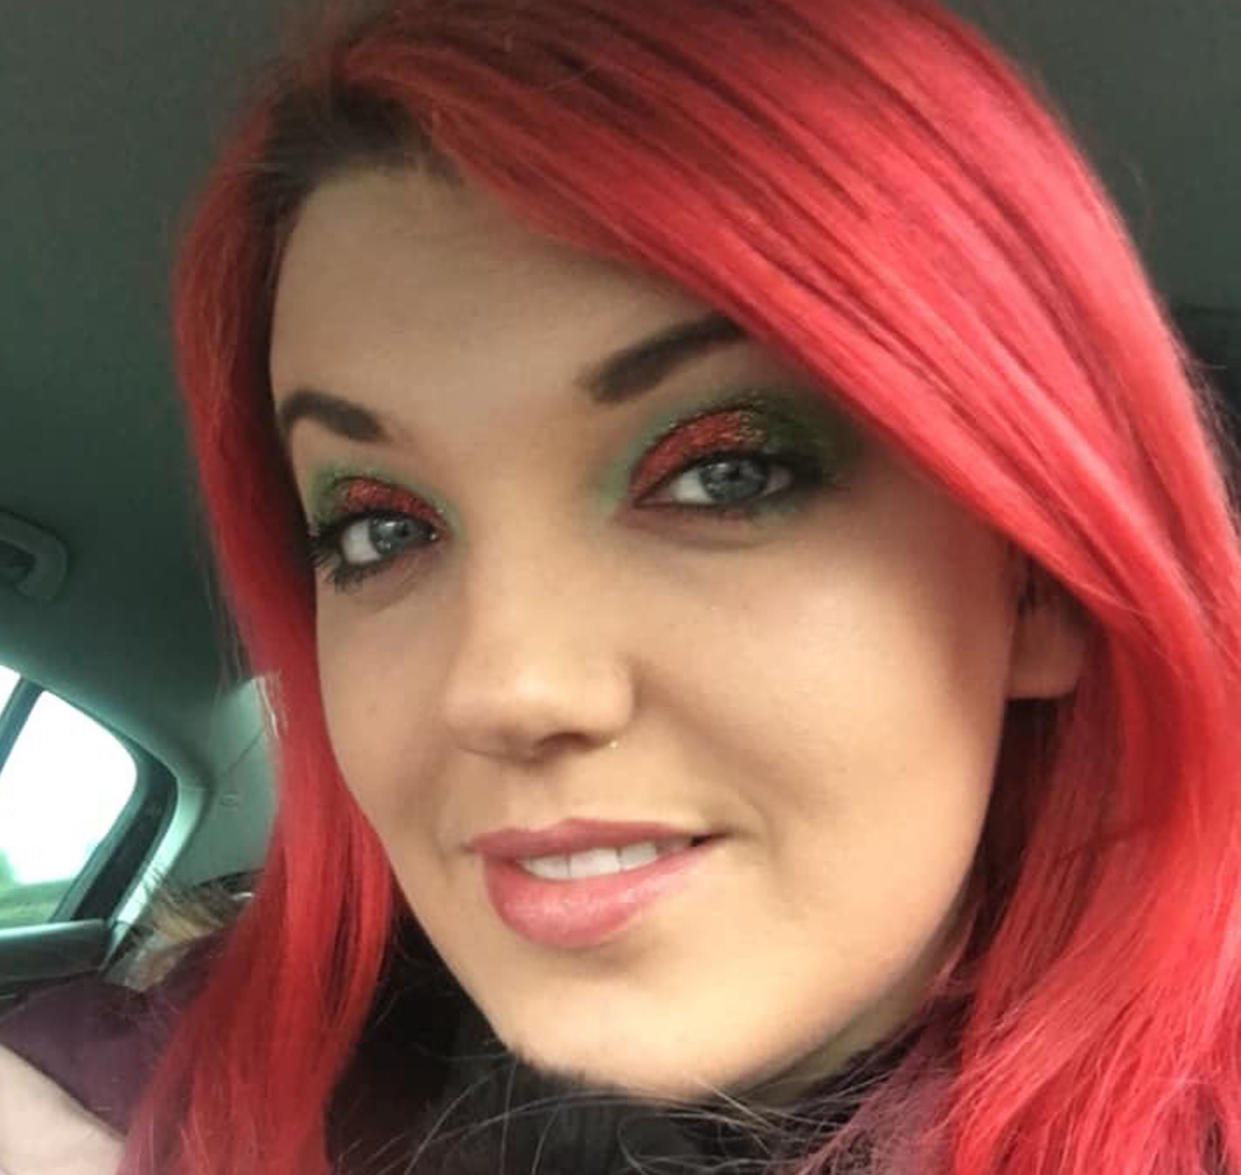 <em>Mother-of-one Rosie Darbyshire was found dead following a “brutal and sustained assault” in Preston, Lancashire (Picture: Lancashire Constabulary/PA)</em>